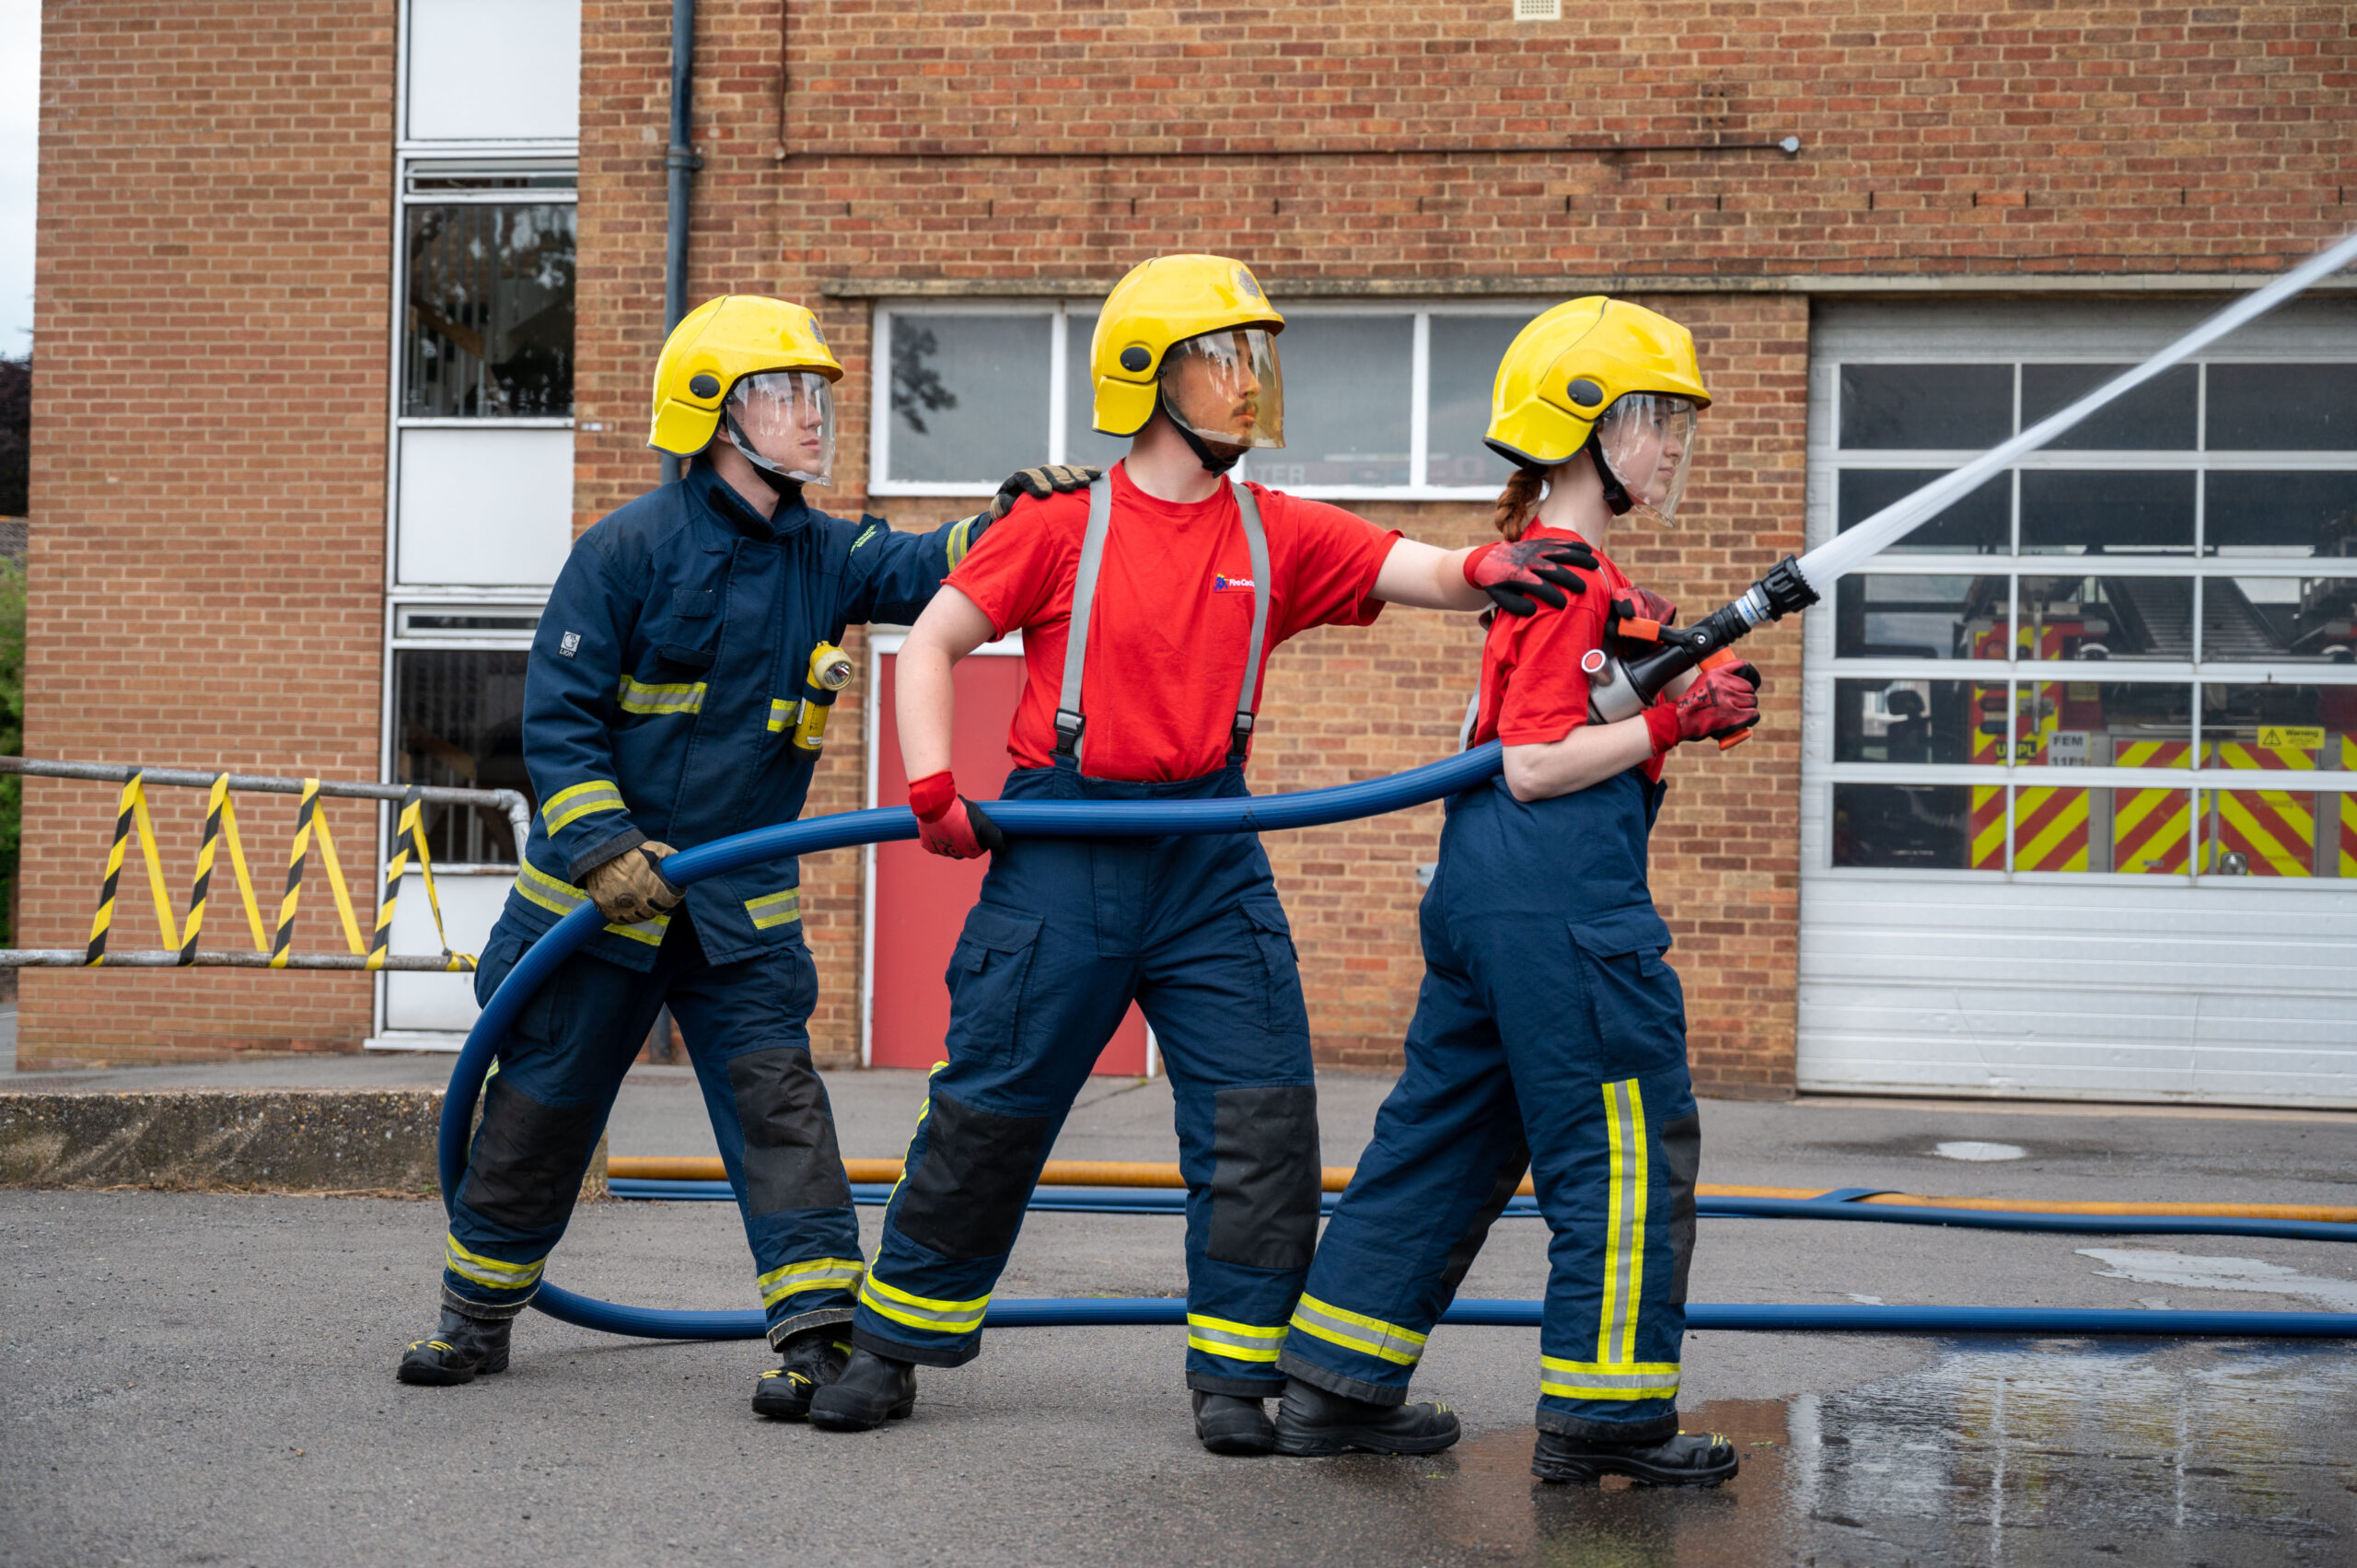 Three emergency services cadets using a firefighting hose